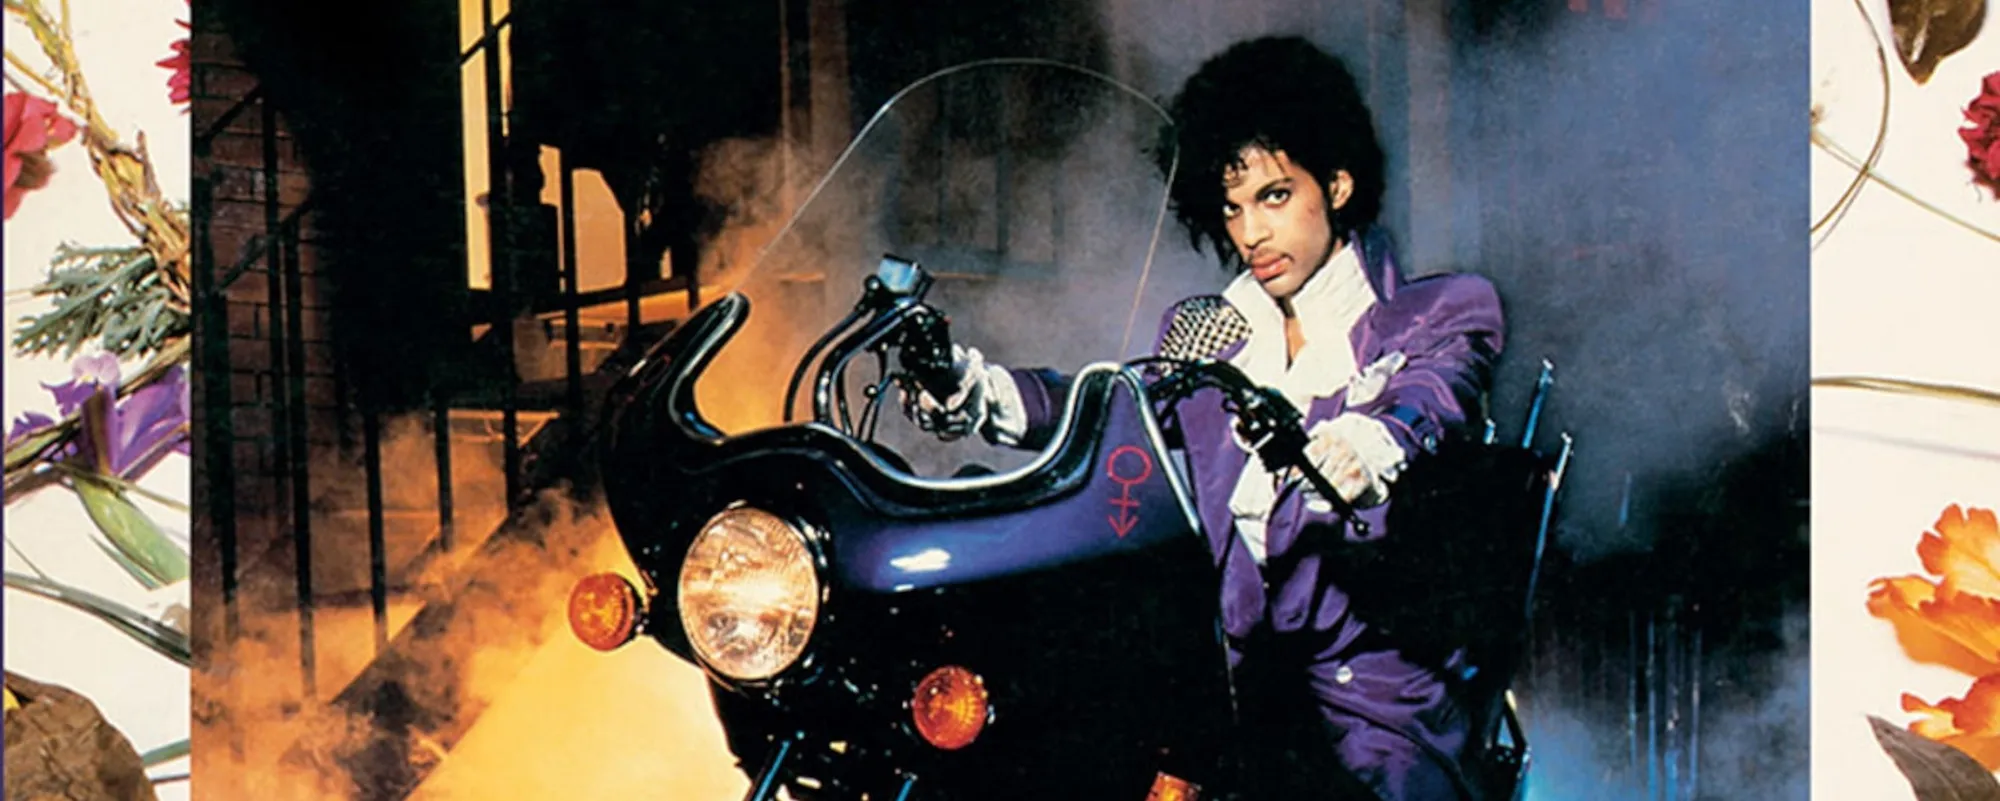 The Story Behind Prince’s Drama-Infused ‘Purple Rain’ Album Cover